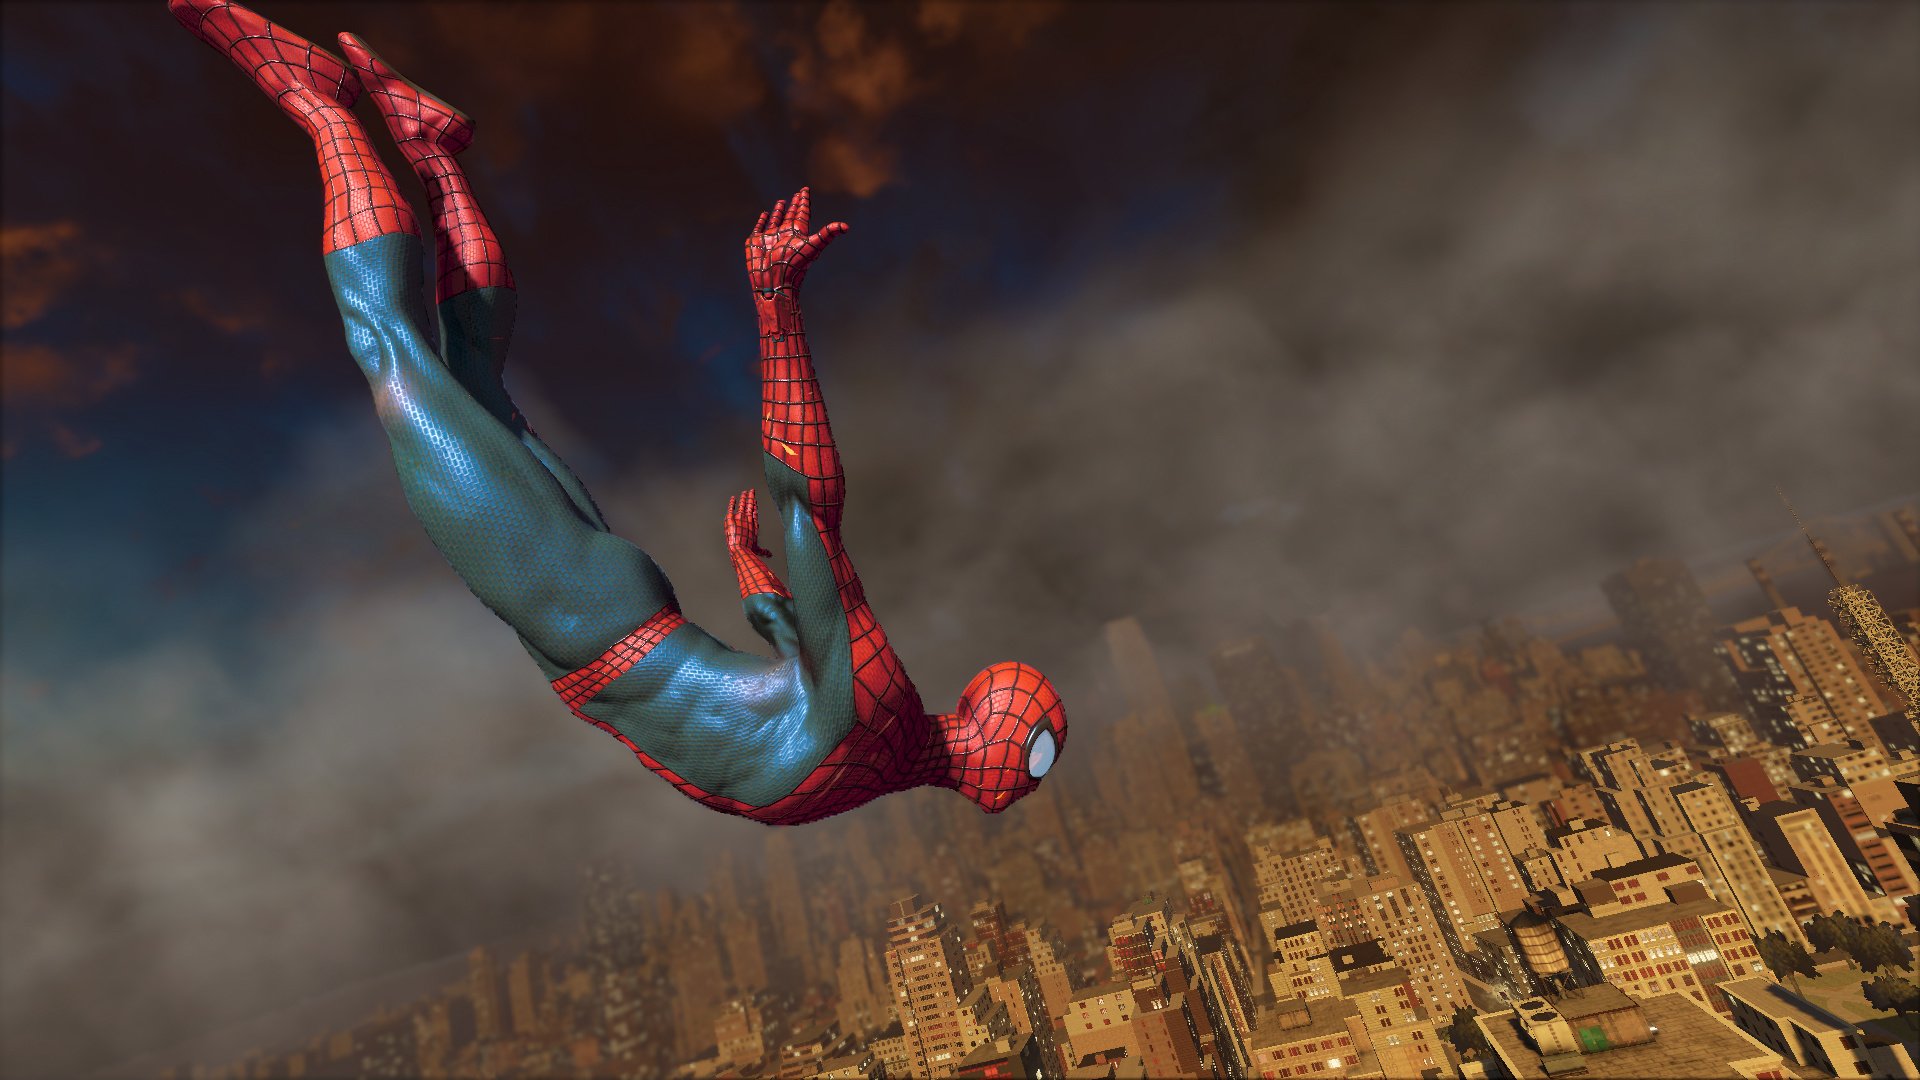 the amazing spider man 2 pc game trainer